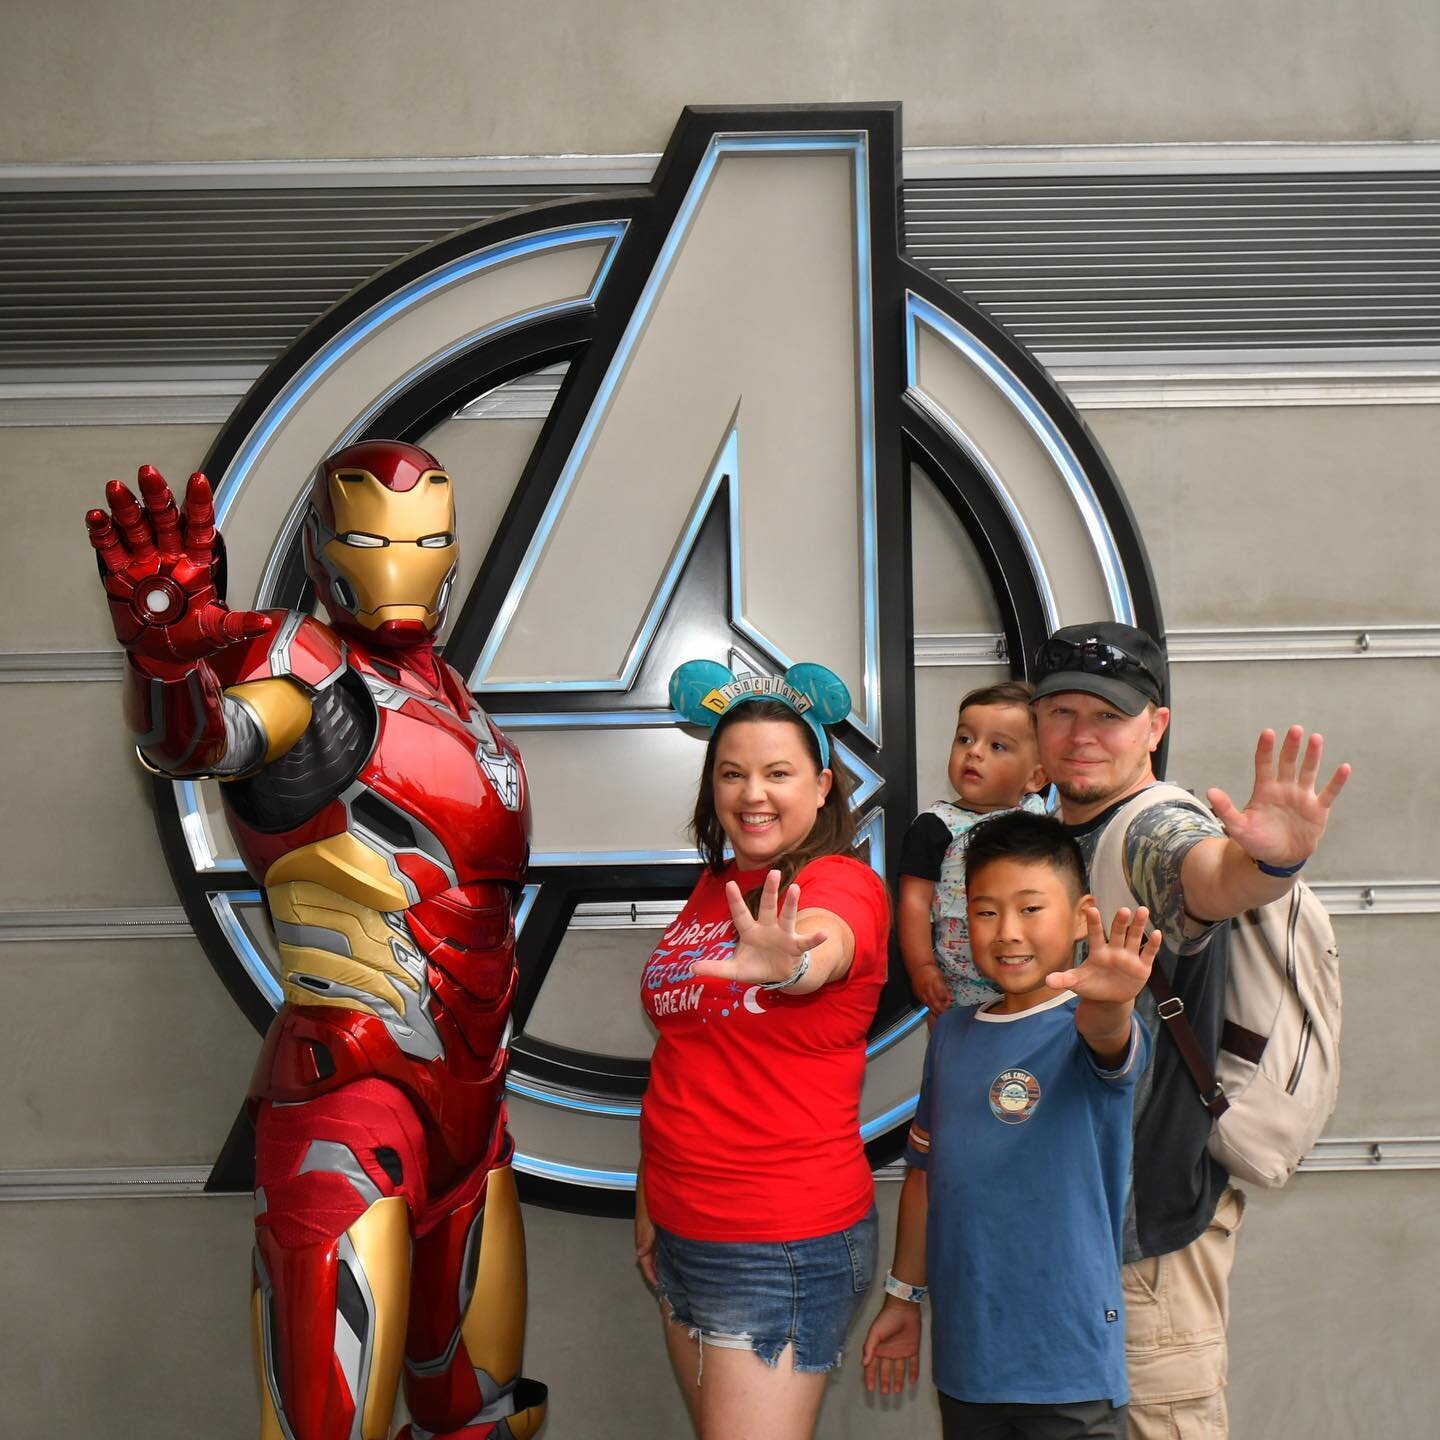 The families who save the world together, stick together. I used to wonder why people preferred Disneyland to Disney World but I&rsquo;ve got to admit&hellip;I might be more of a Disneyland fan now, especially with Avengers campus. You owe it to your